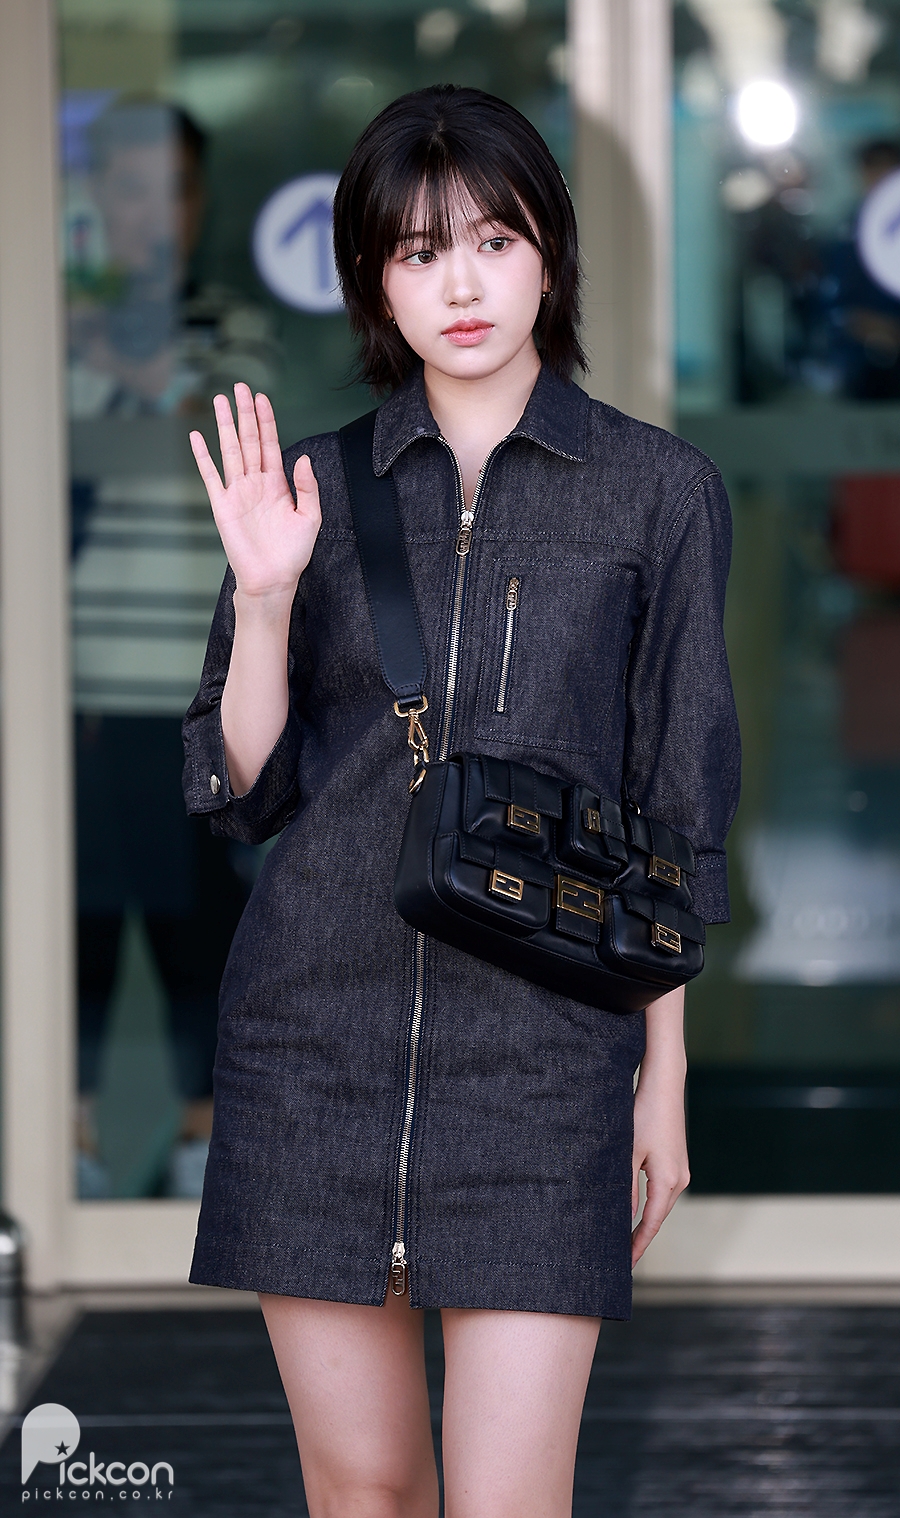 On the morning of the 18th, IVE's An Yujin departed for Milan via Incheon International Airport to attend the FENDI SS24 women's collection show.